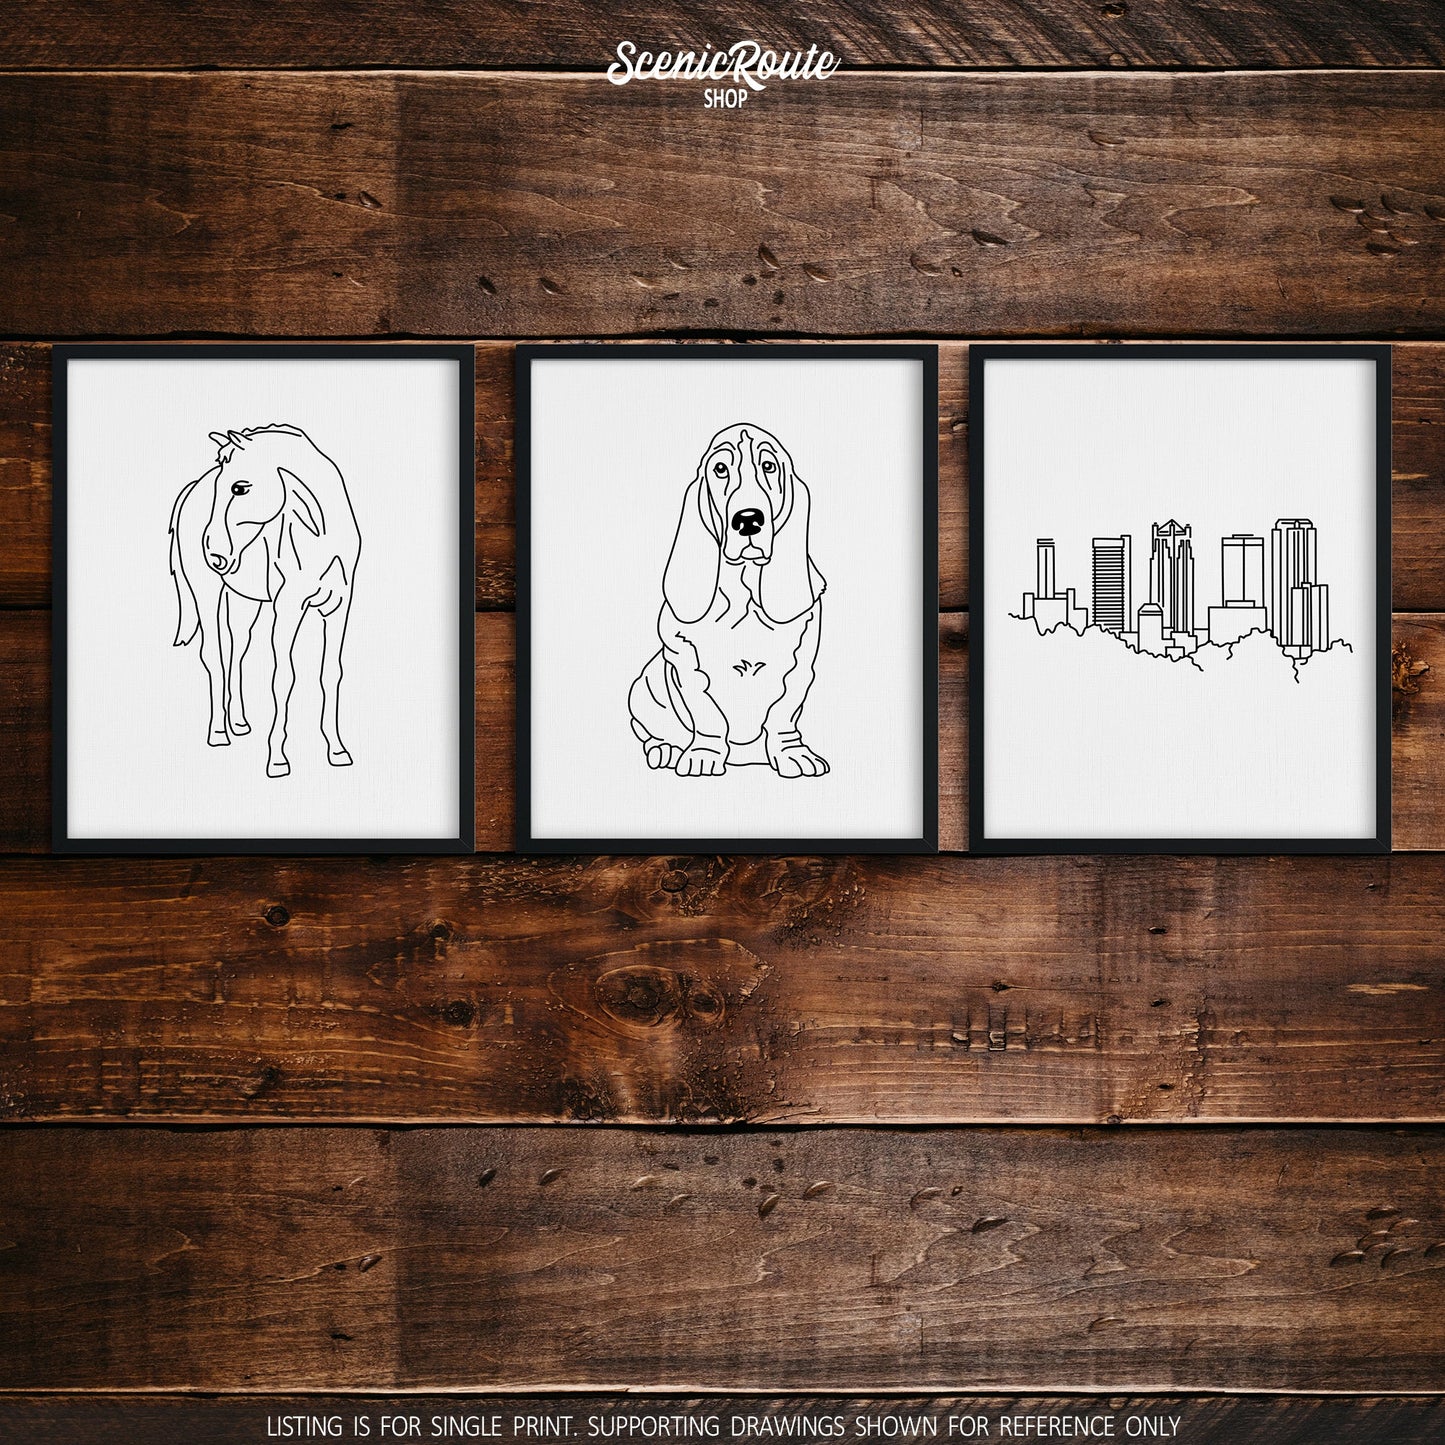 A group of three framed drawings on a dark wood wall.  The line art drawings include a horse, basset hound dog, and Birmingham Alabama skyline